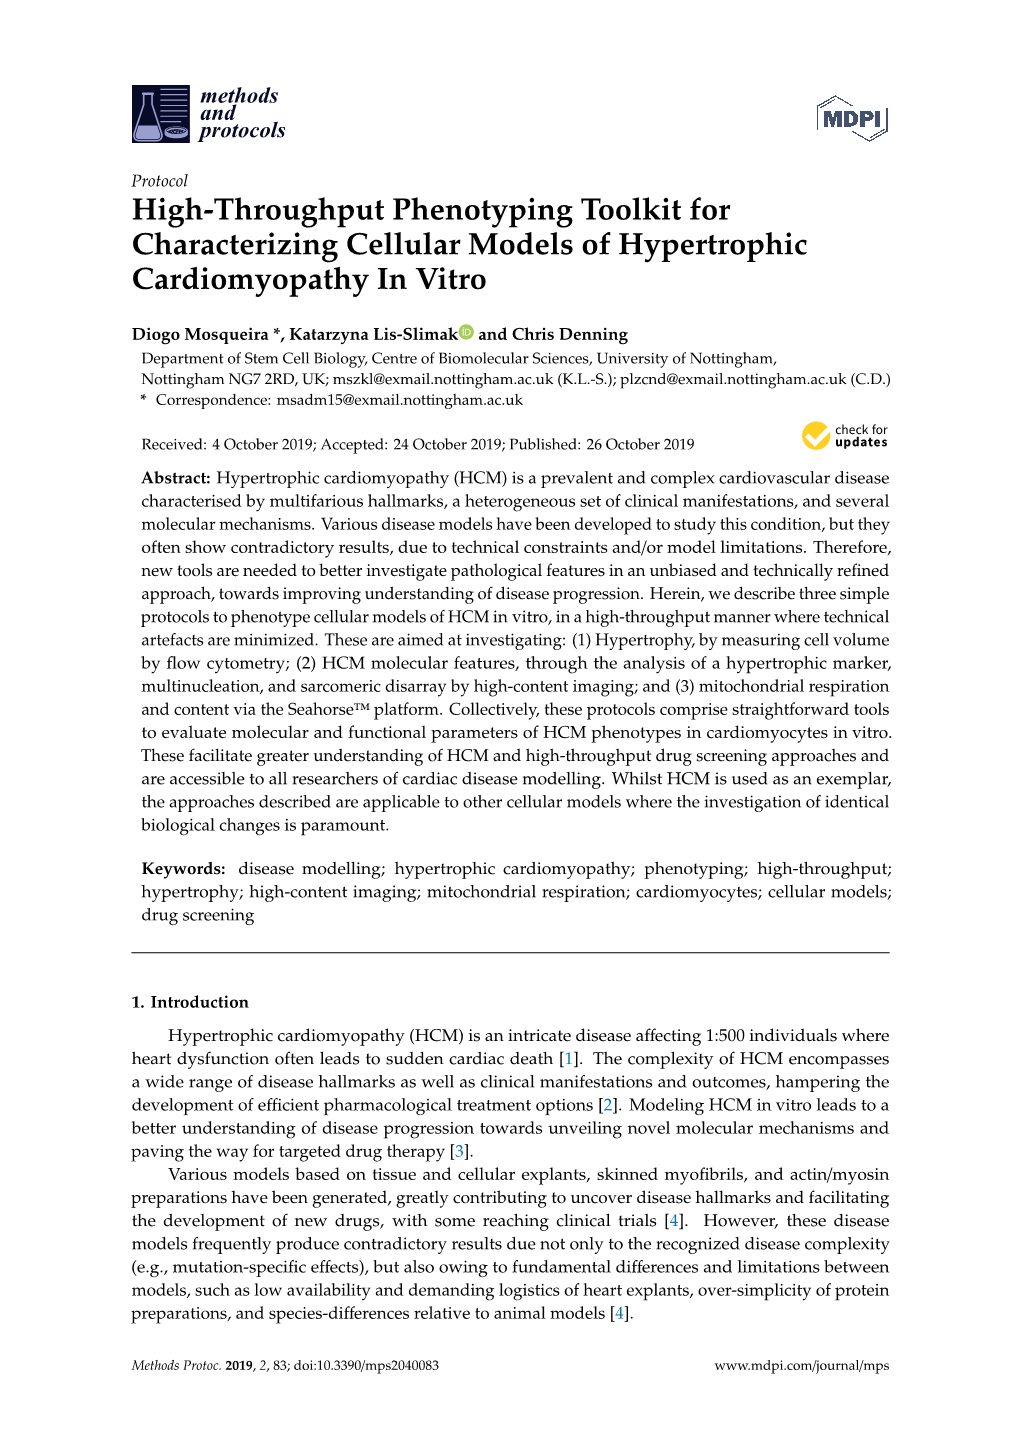 High-Throughput Phenotyping Toolkit for Characterizing Cellular Models of Hypertrophic Cardiomyopathy in Vitro